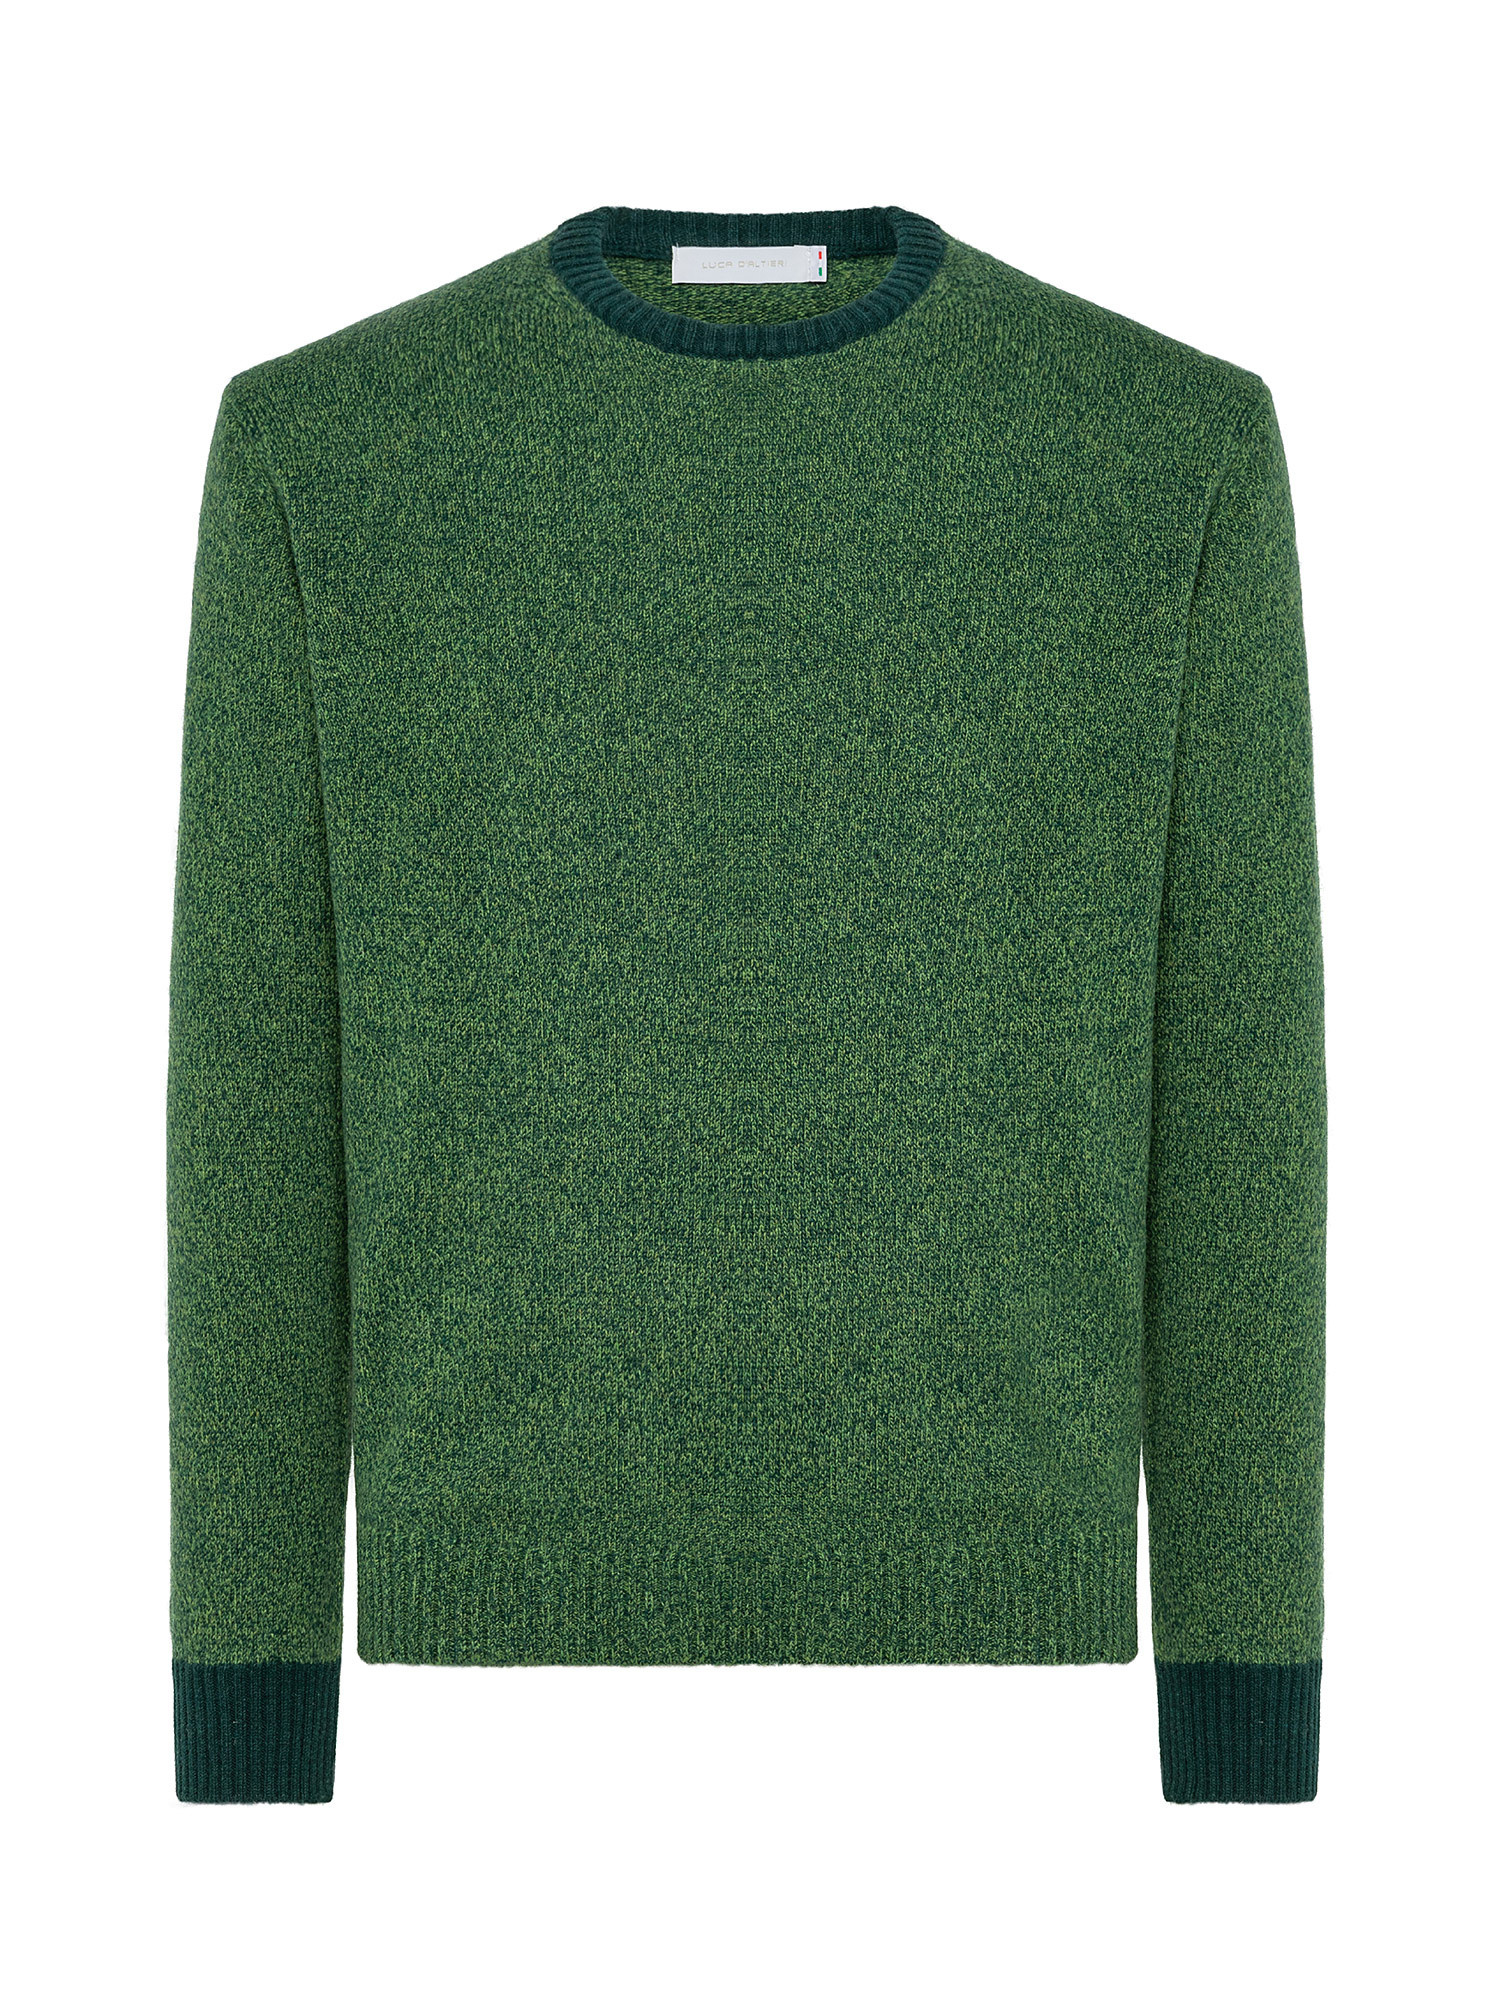 Pullover girocollo, Verde, large image number 0